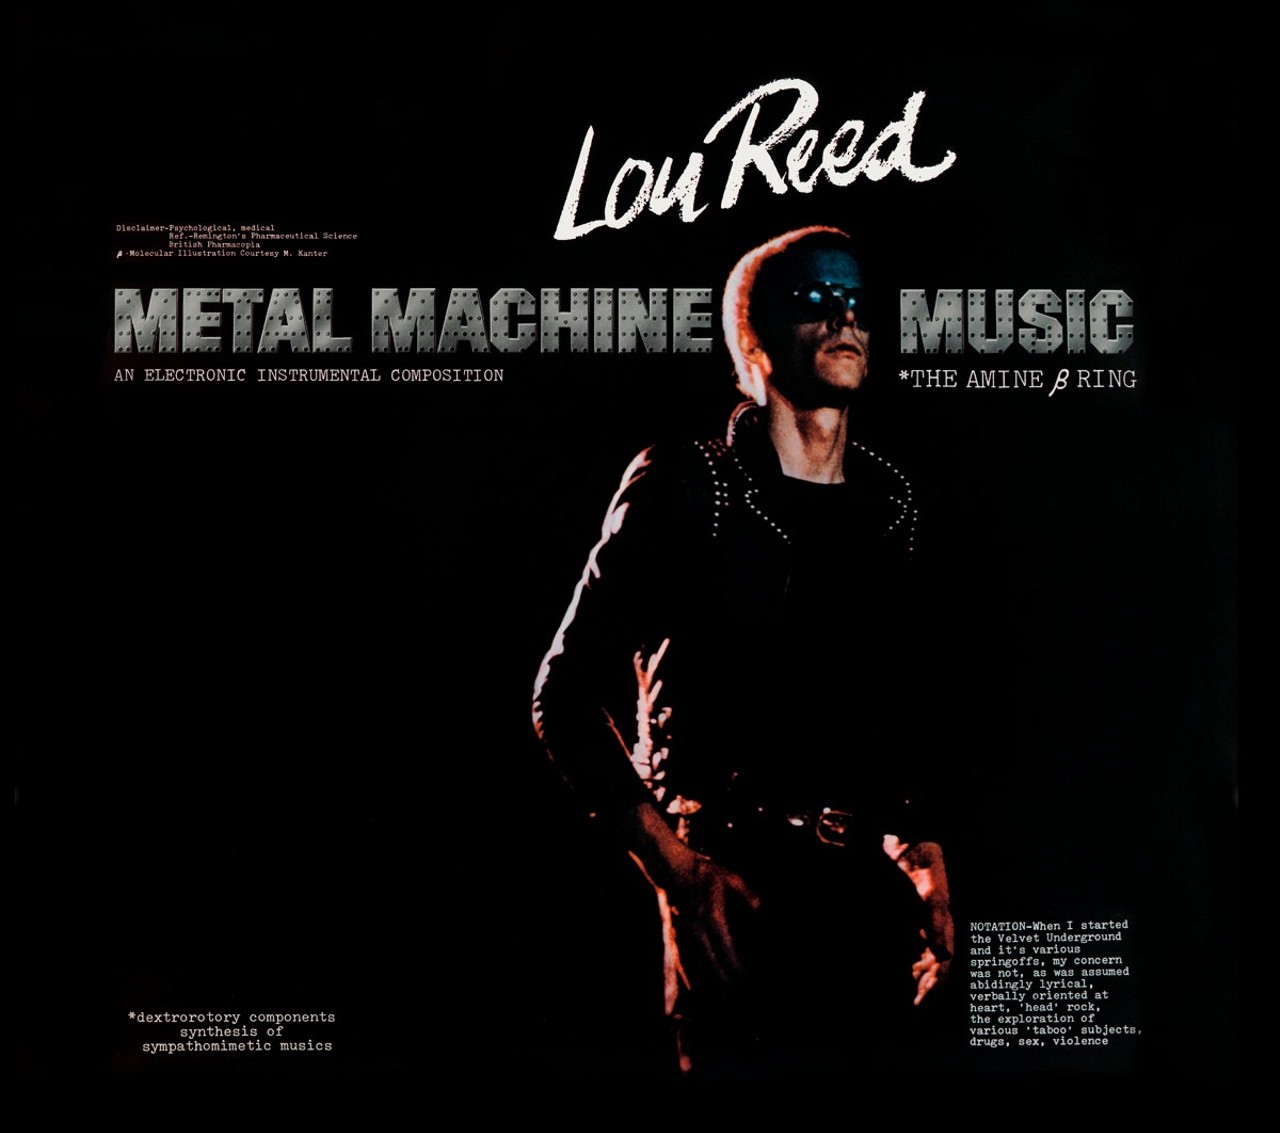 Metal Machine Music
A double-album of feedback, even Reed says that this piece of work is unlistenable. We always considered that a challenge.